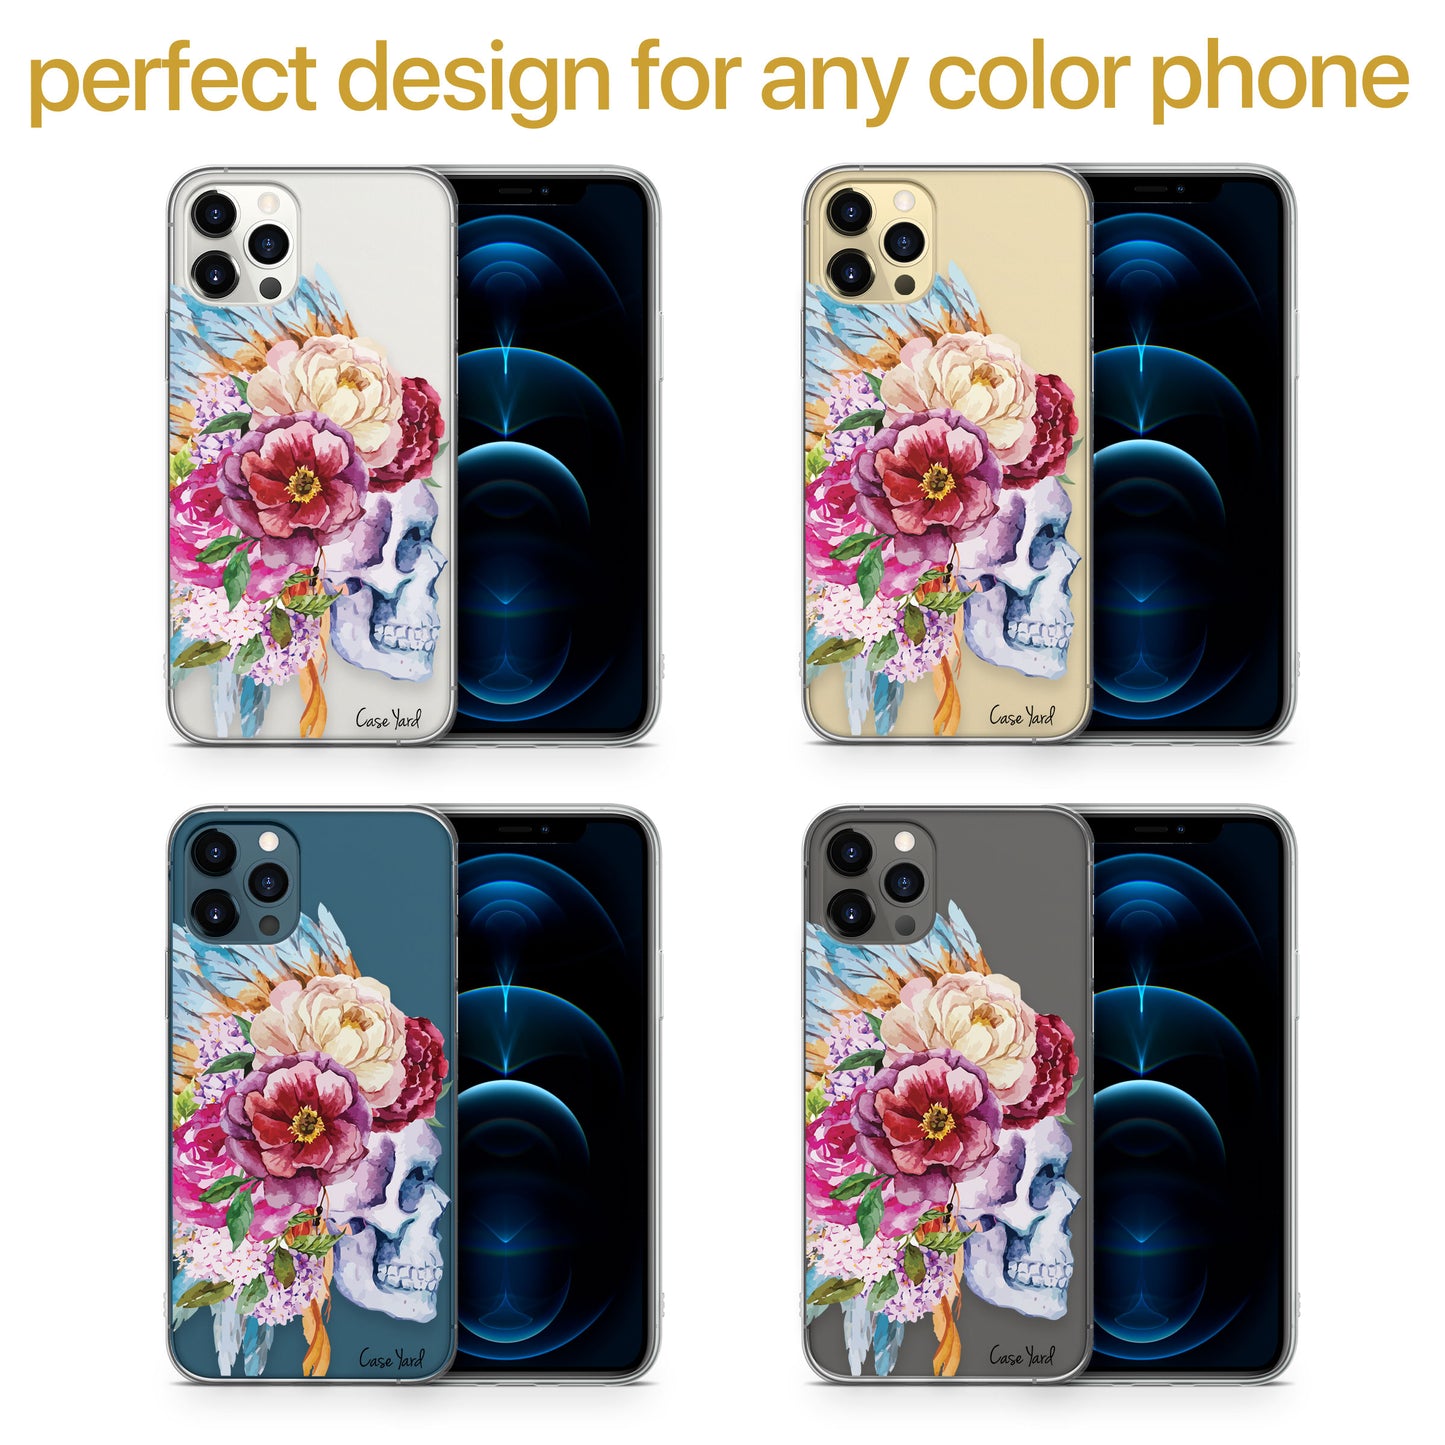 TPU Clear case with (Watercolor Skull) Design for iPhone & Samsung Phones